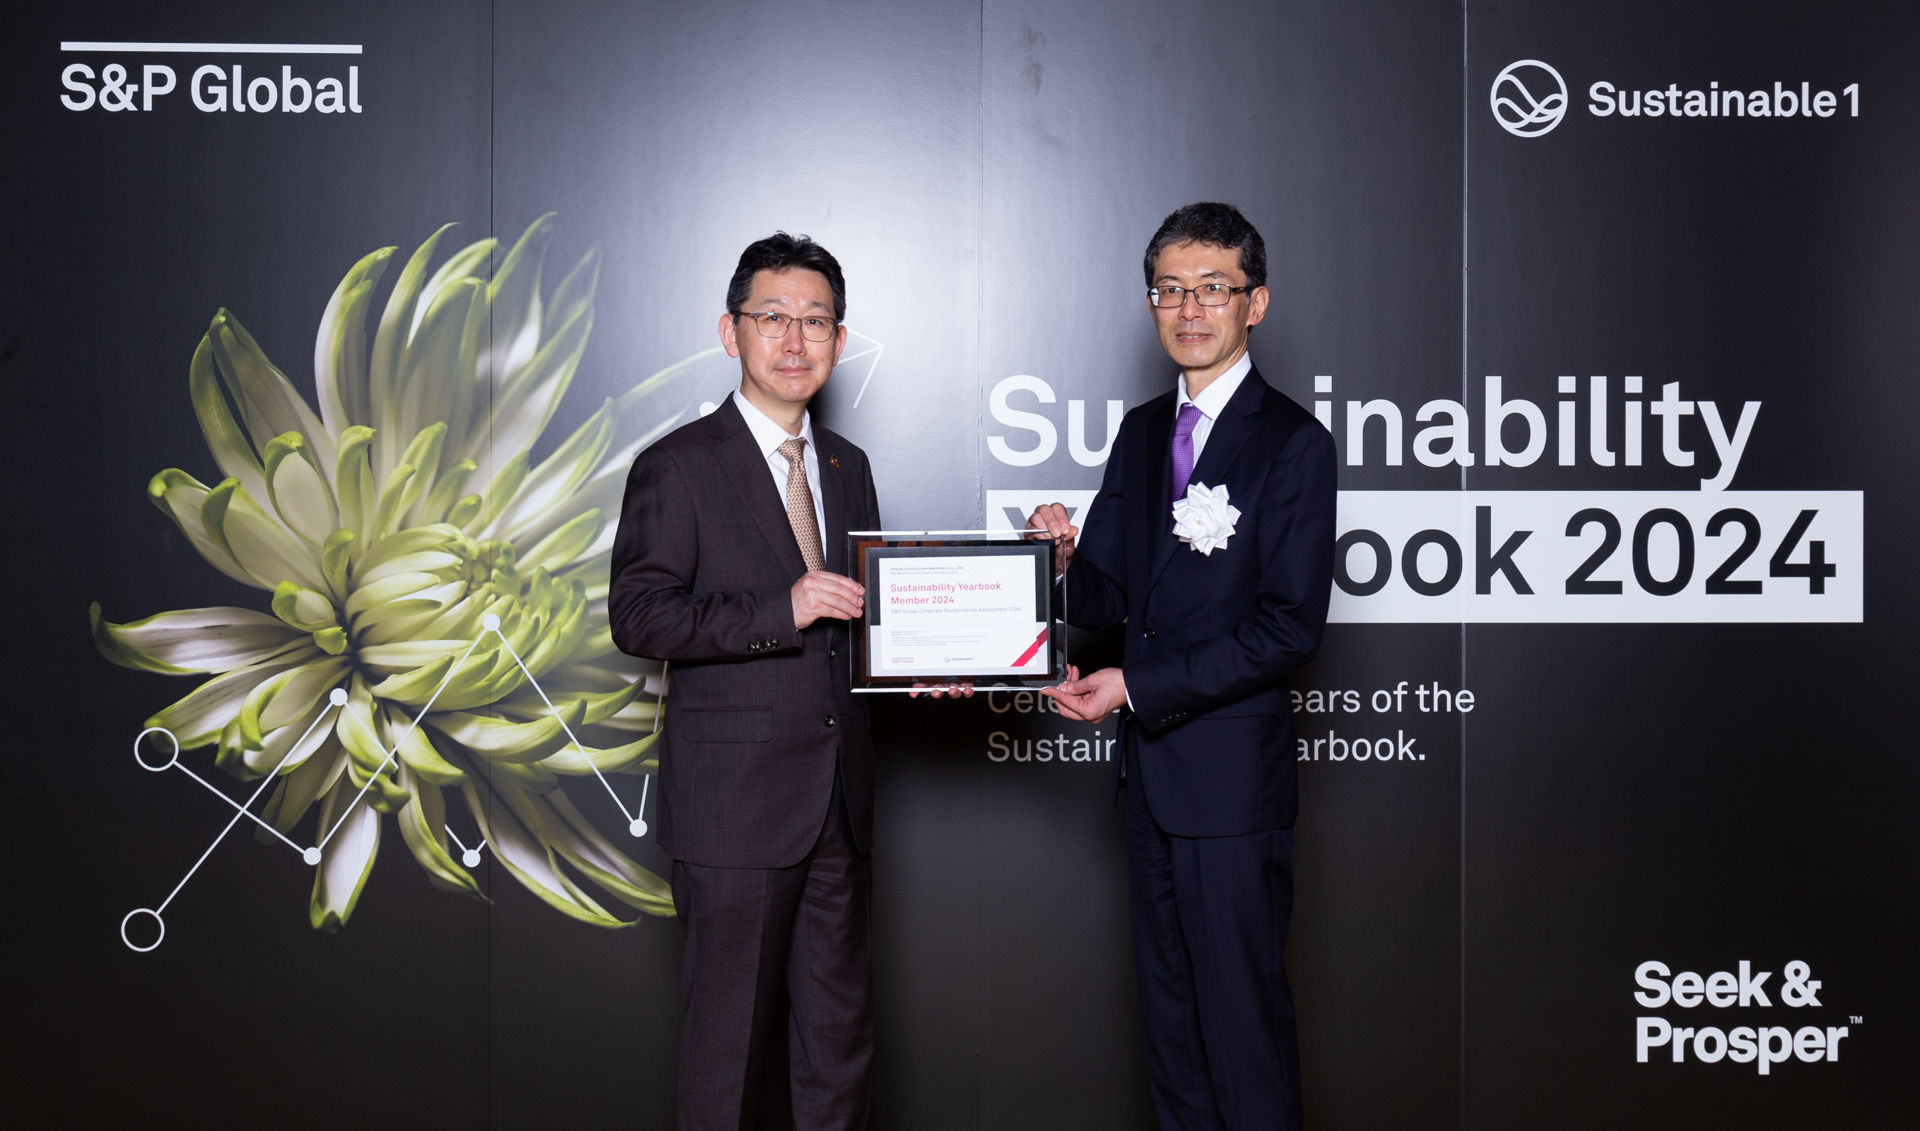 A certificate was awarded from Koji Omachi, Managing Director, Head of Japan for S&P Global Sustainable1 (right) to Shigeki Sasano, President of Sustainability Promotion Group, Hitachi Construction Machinery (left)